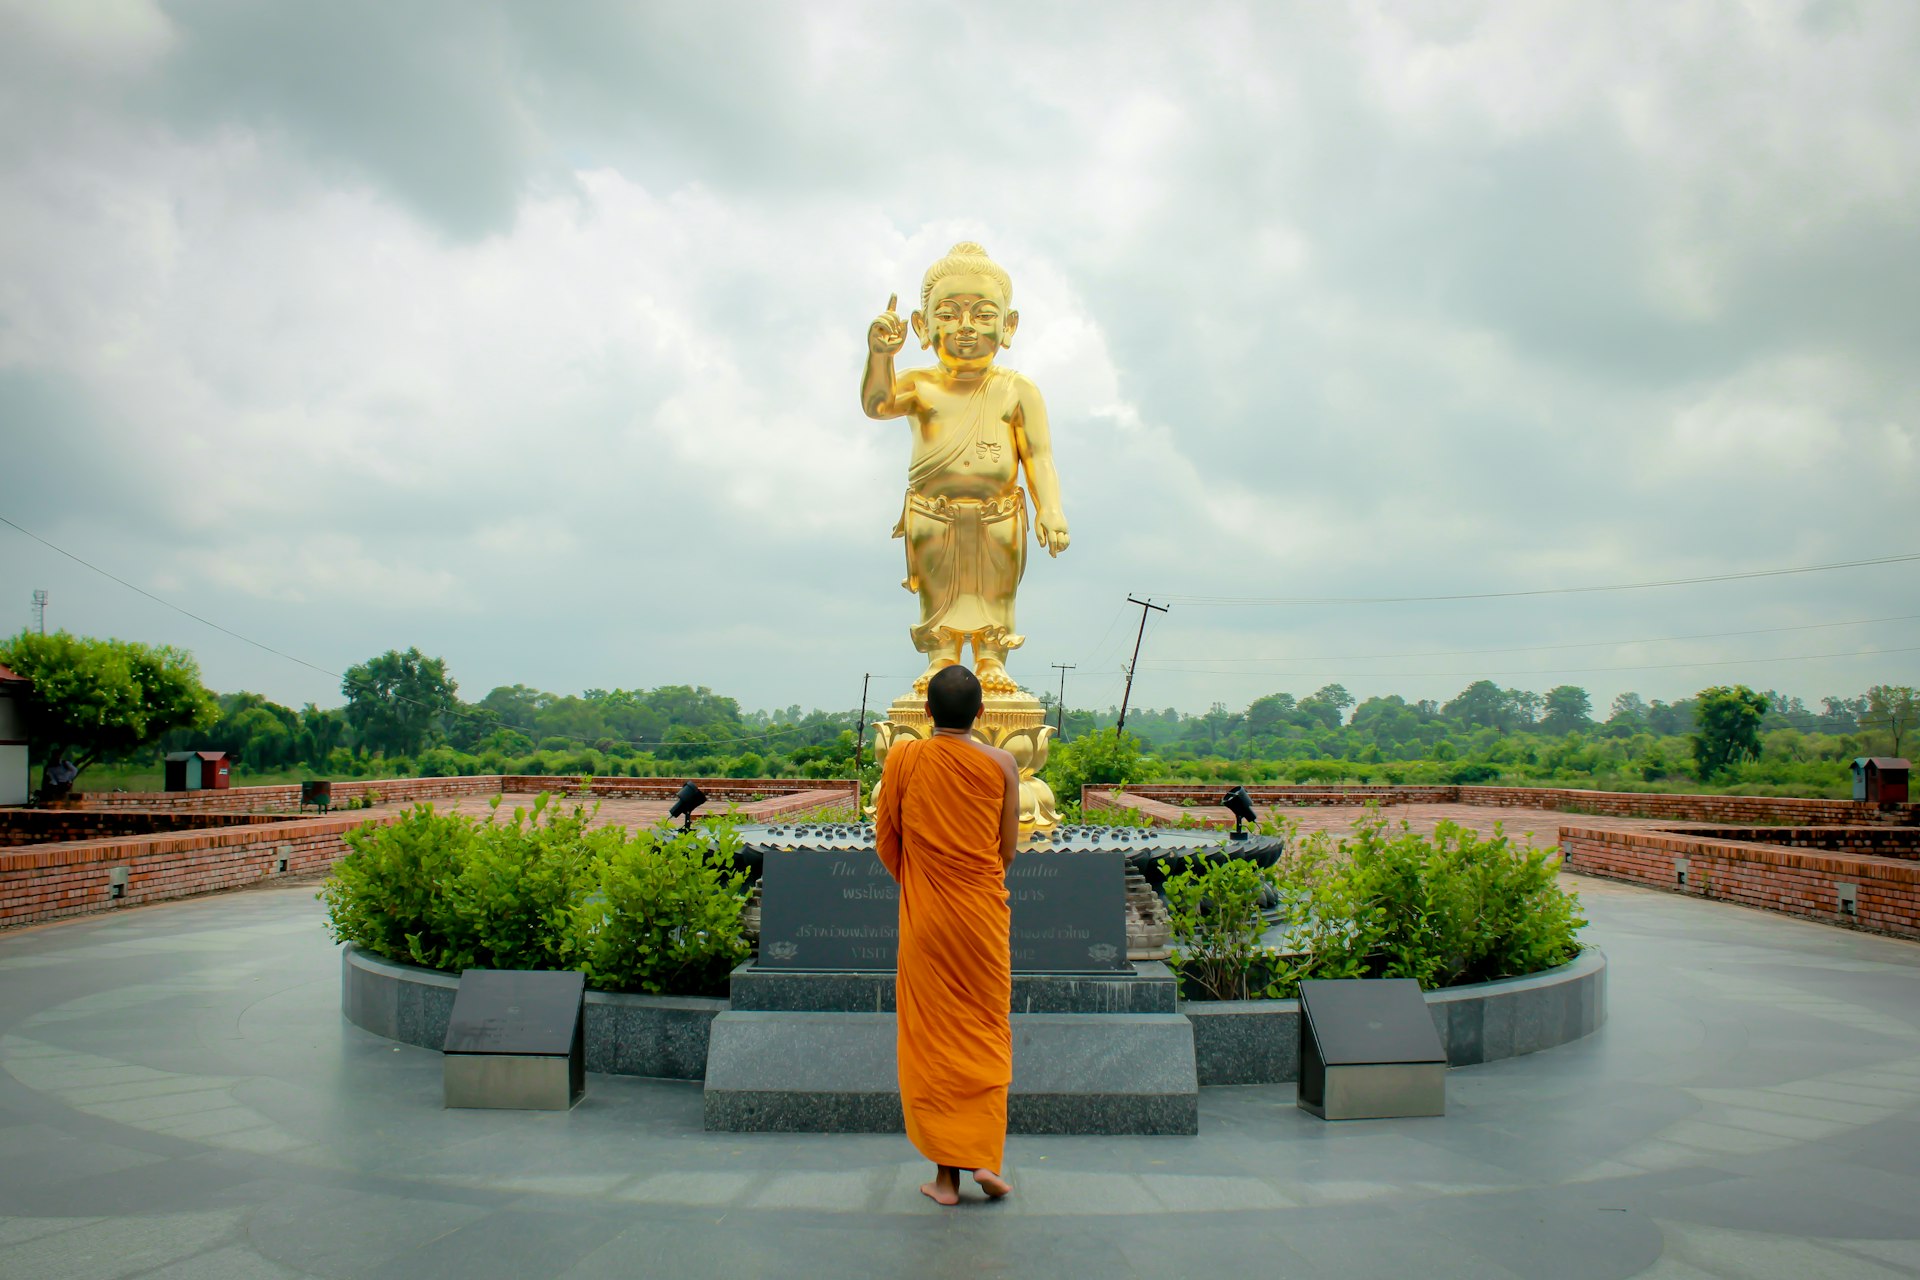 A monk in orange robes stands in front of a gold buddha statue